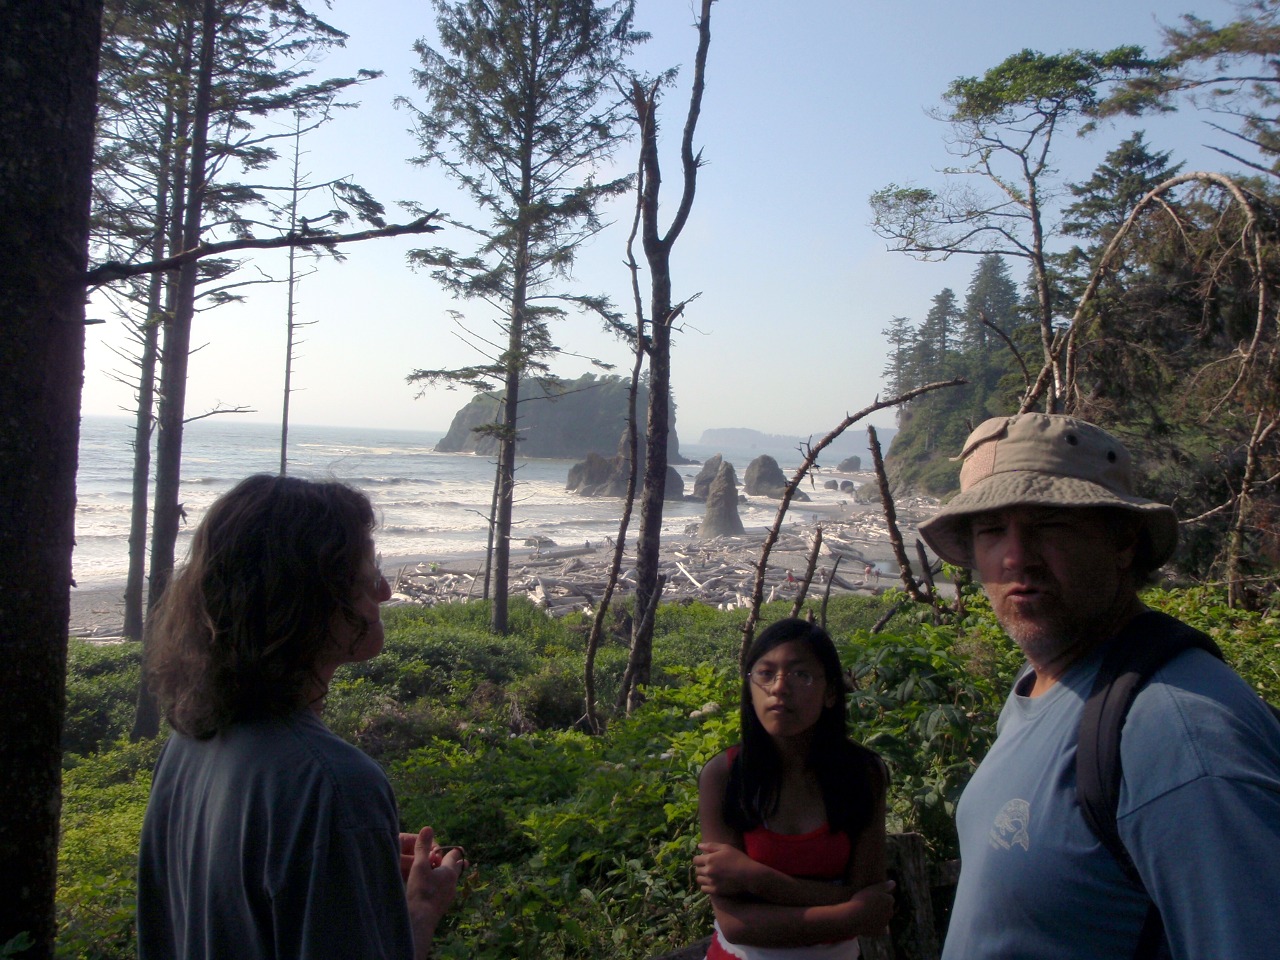 We meet up with Bill &amp; family at Ruby Beach, Olympic NP